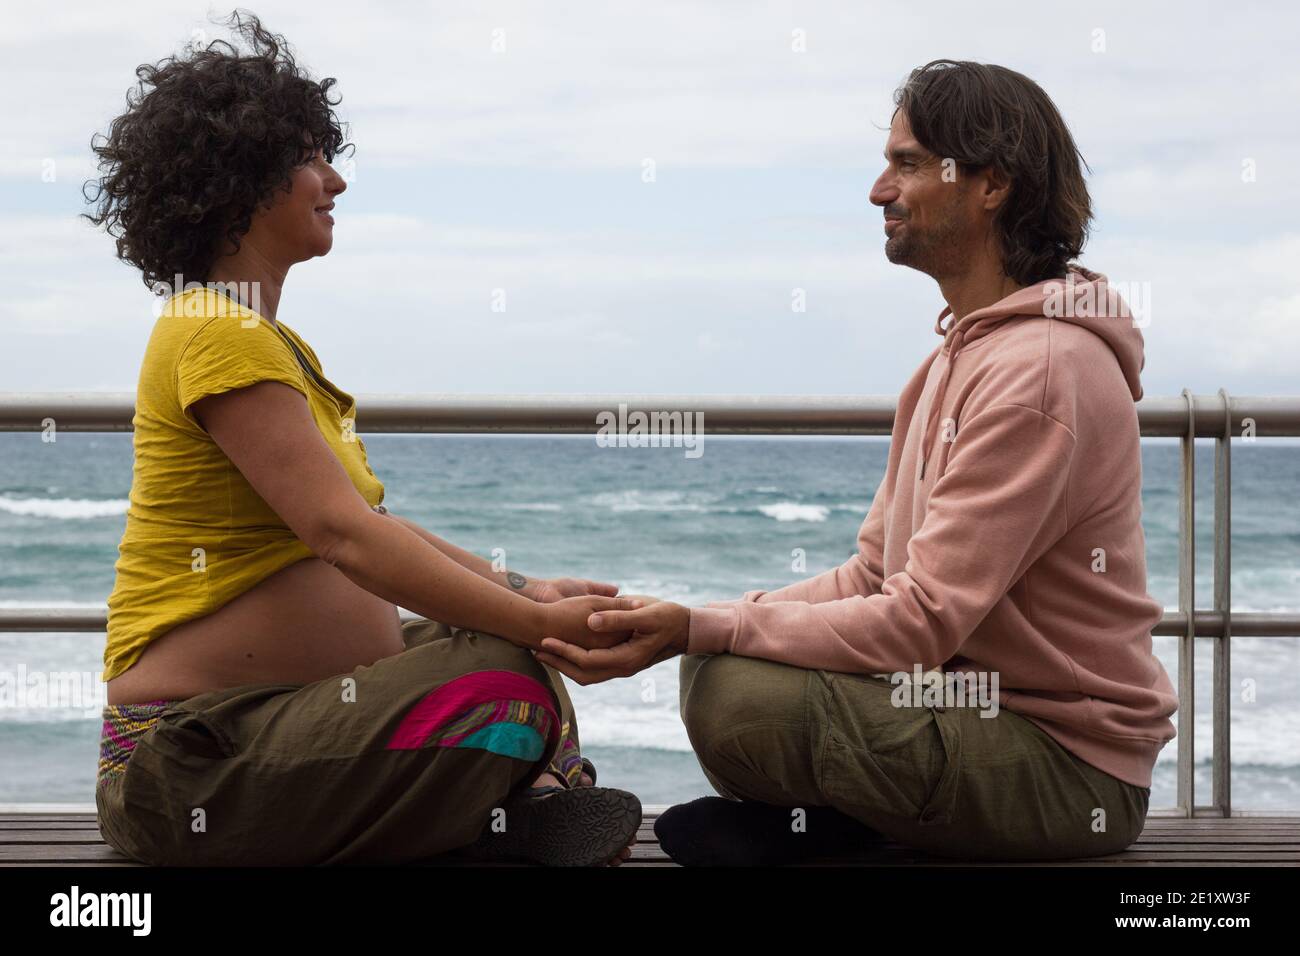 Expecting parents holding hands sitting on lotus pose on bench by beach in Las Palmas, Spain. Pregnant woman and future father enyoing leisure time Stock Photo